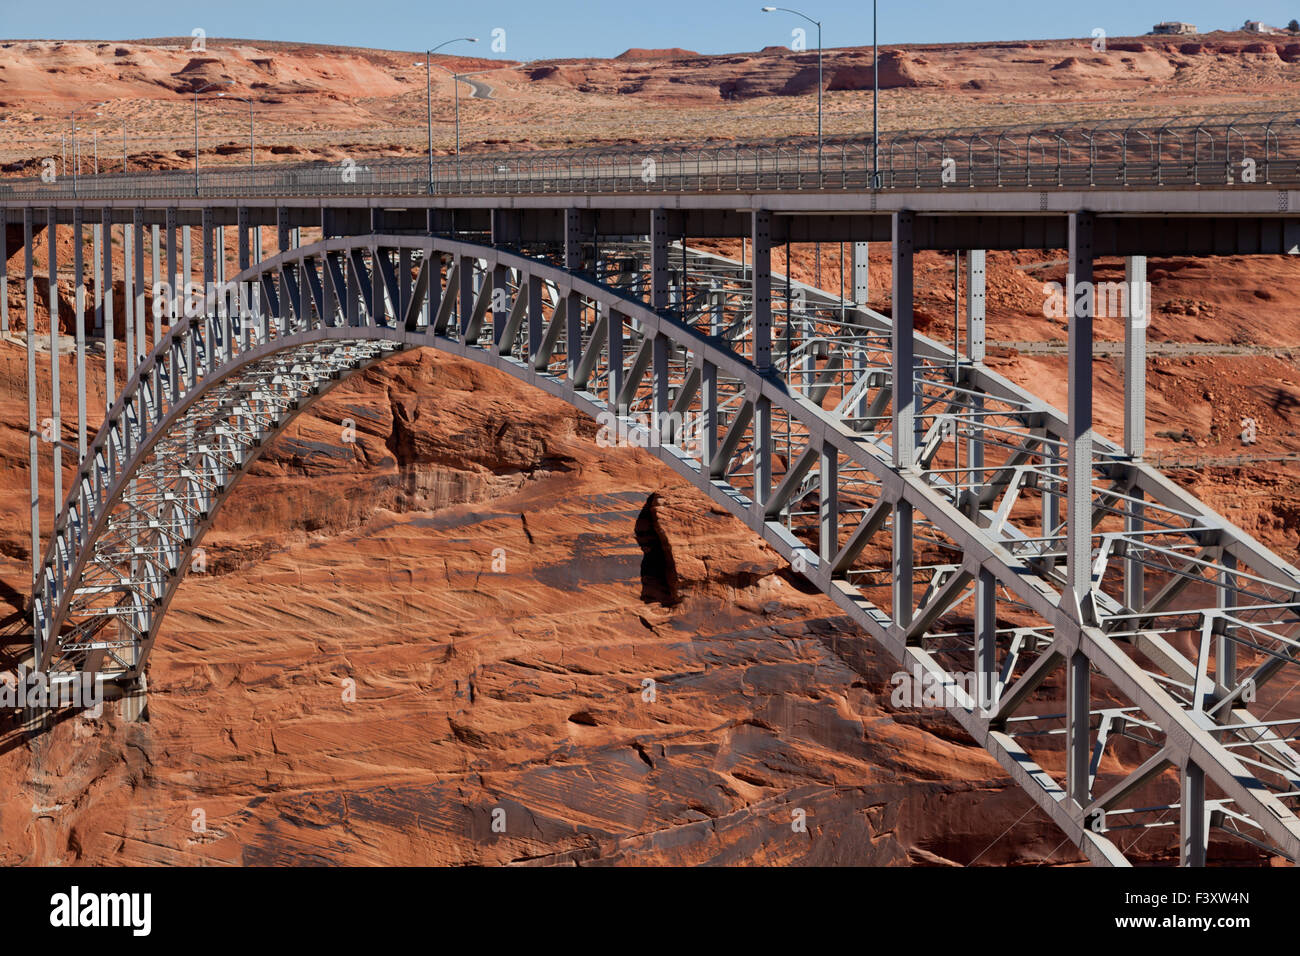 The Glen Canyon Dam Bridge arching across the red rock above the Colorado River in Page, Arizona. Stock Photo